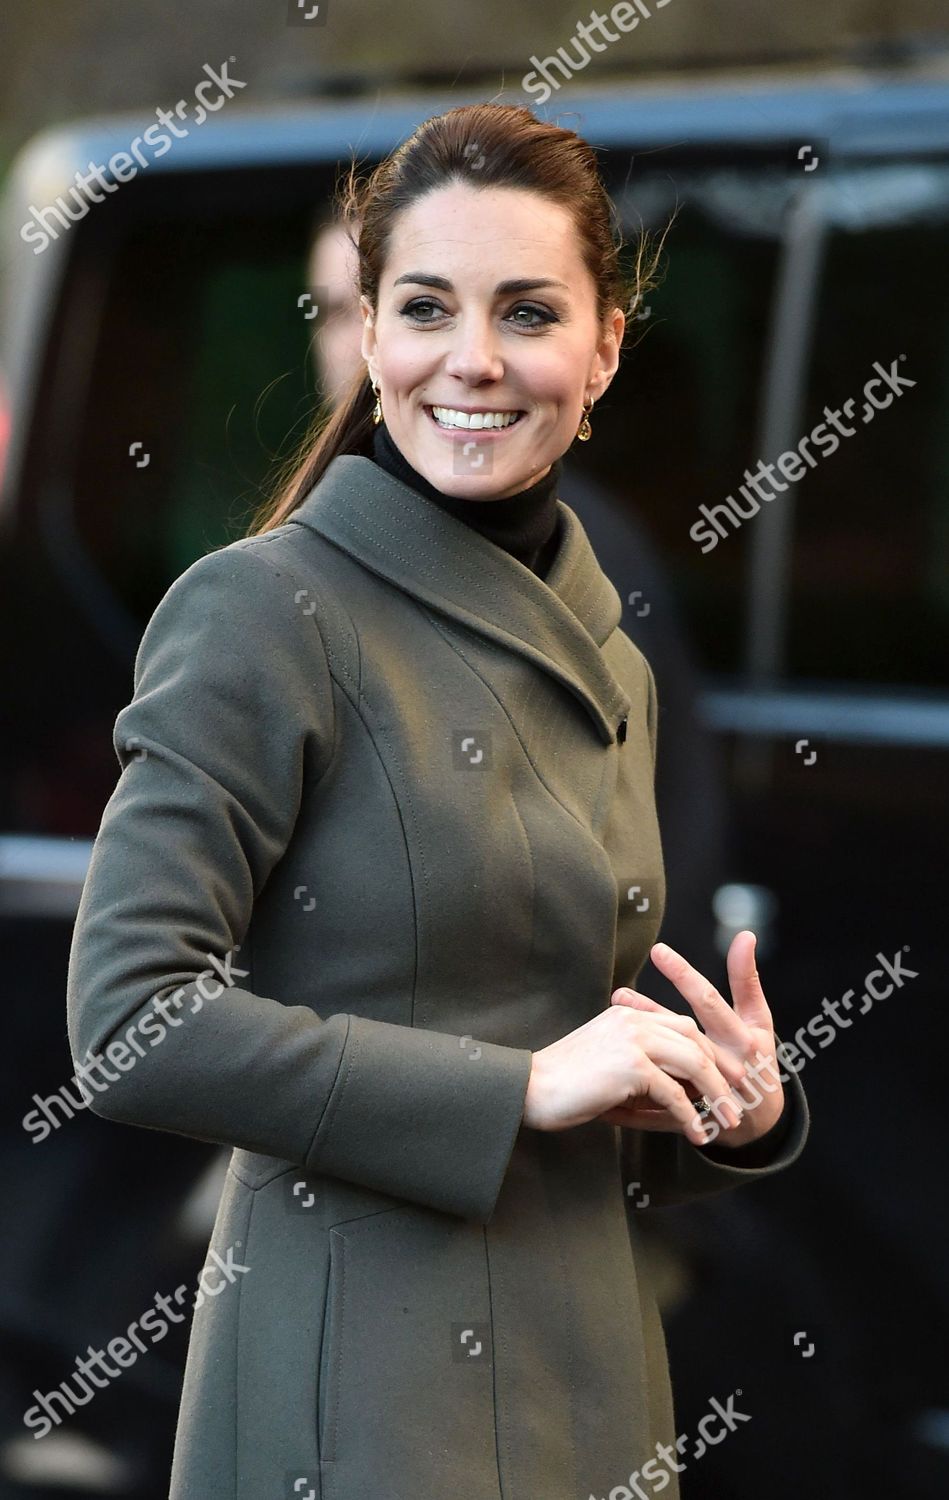 prince-william-and-catherine-duchess-of-cambridge-visit-to-wales-britain-shutterstock-editorial-5407490ap.jpg